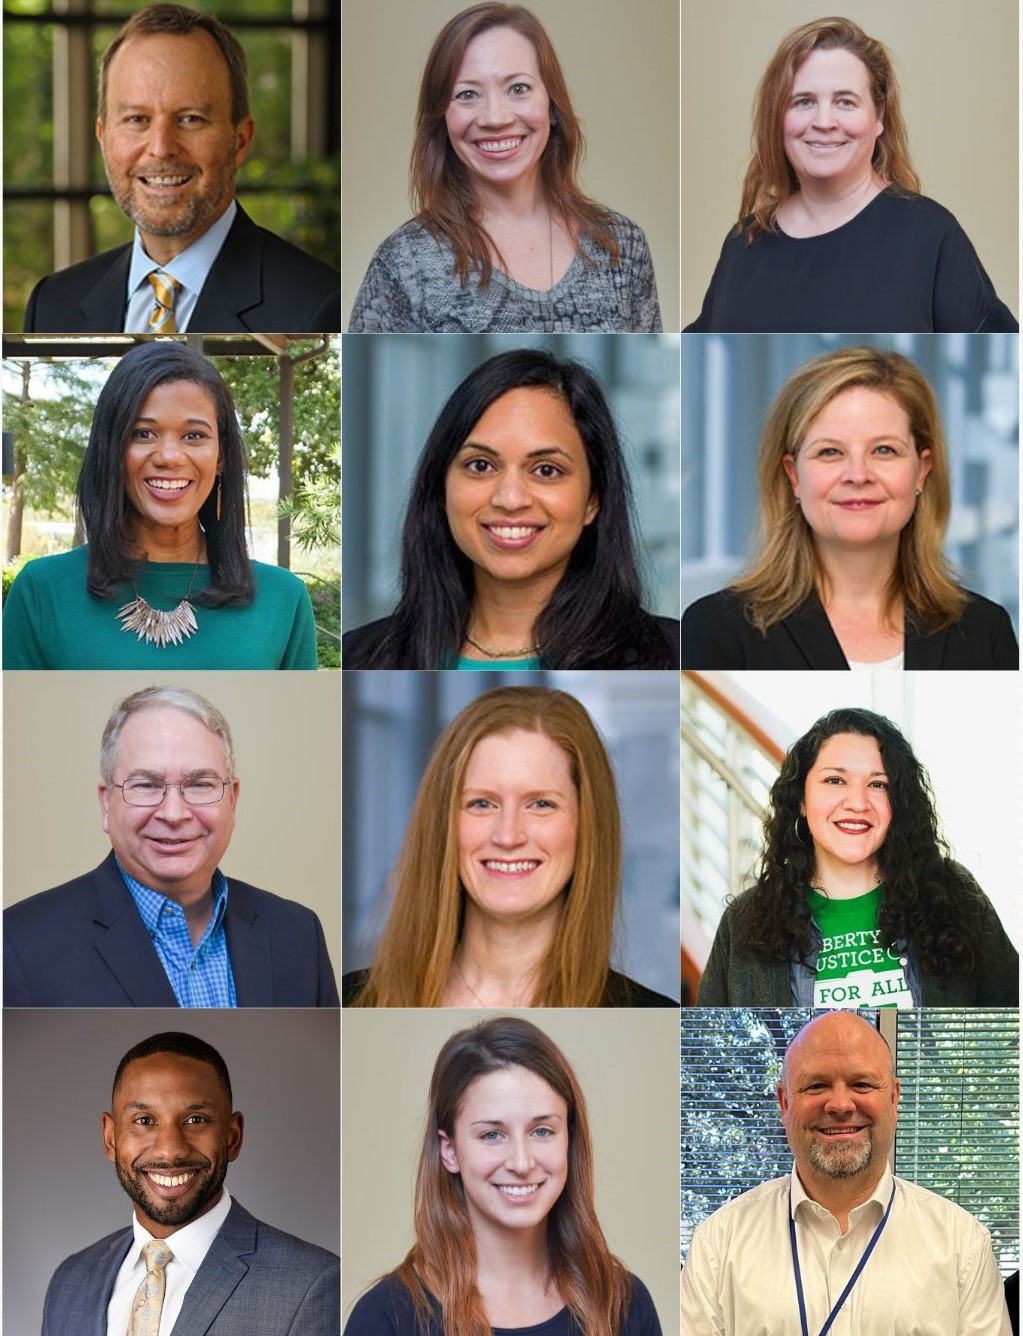 A collage of the 12 members of the Student Wellness and Counseling Team, including 4 men and 8 women.